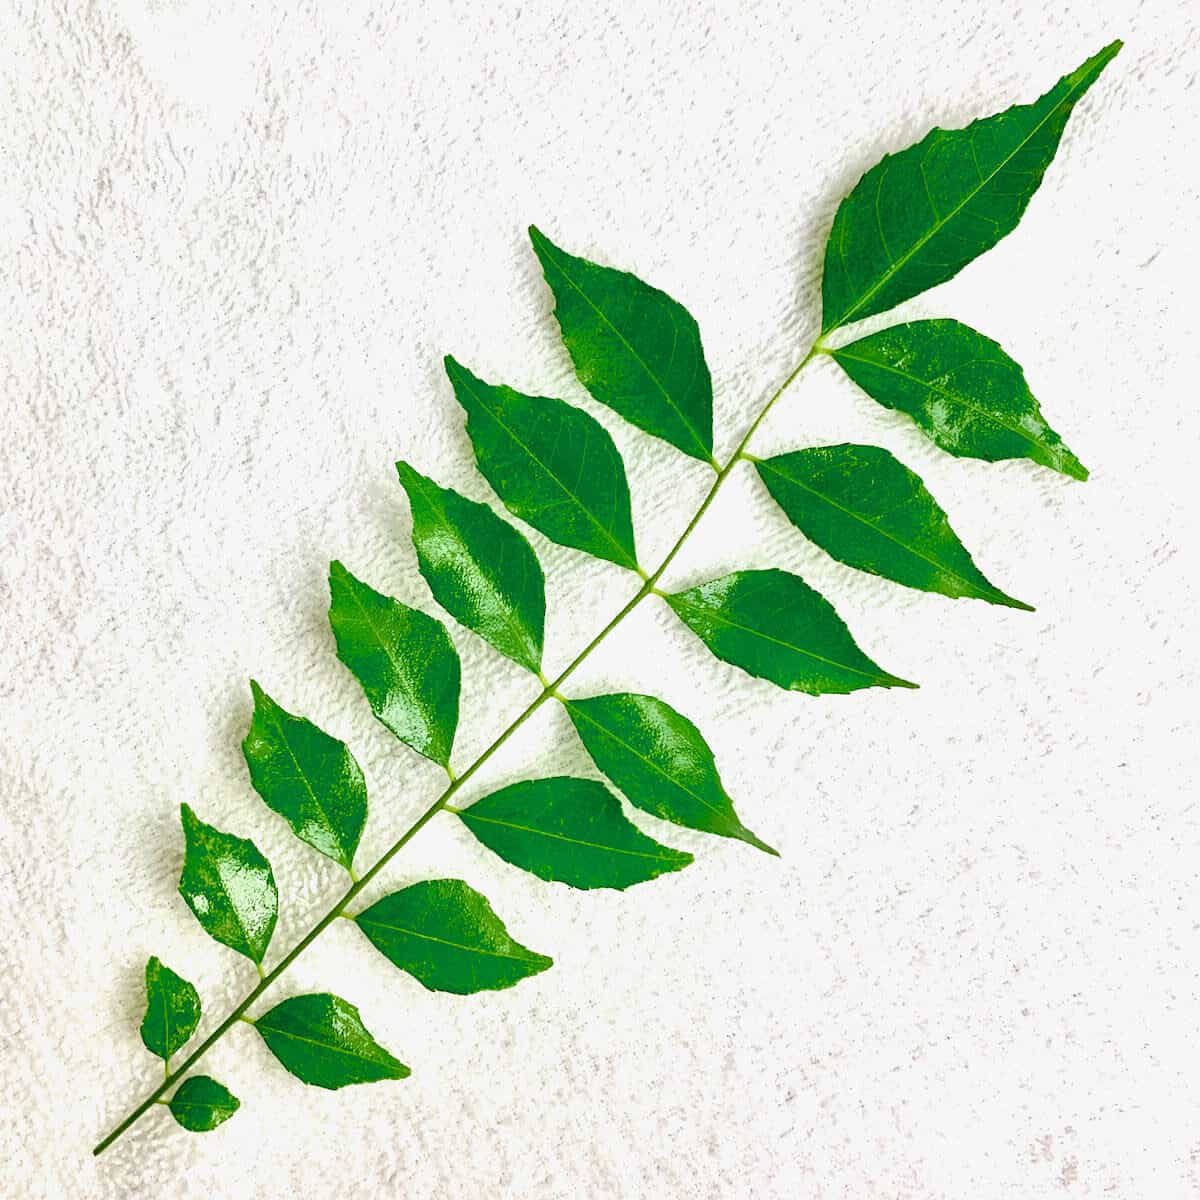 A curry leaf sprig from a curry tree.